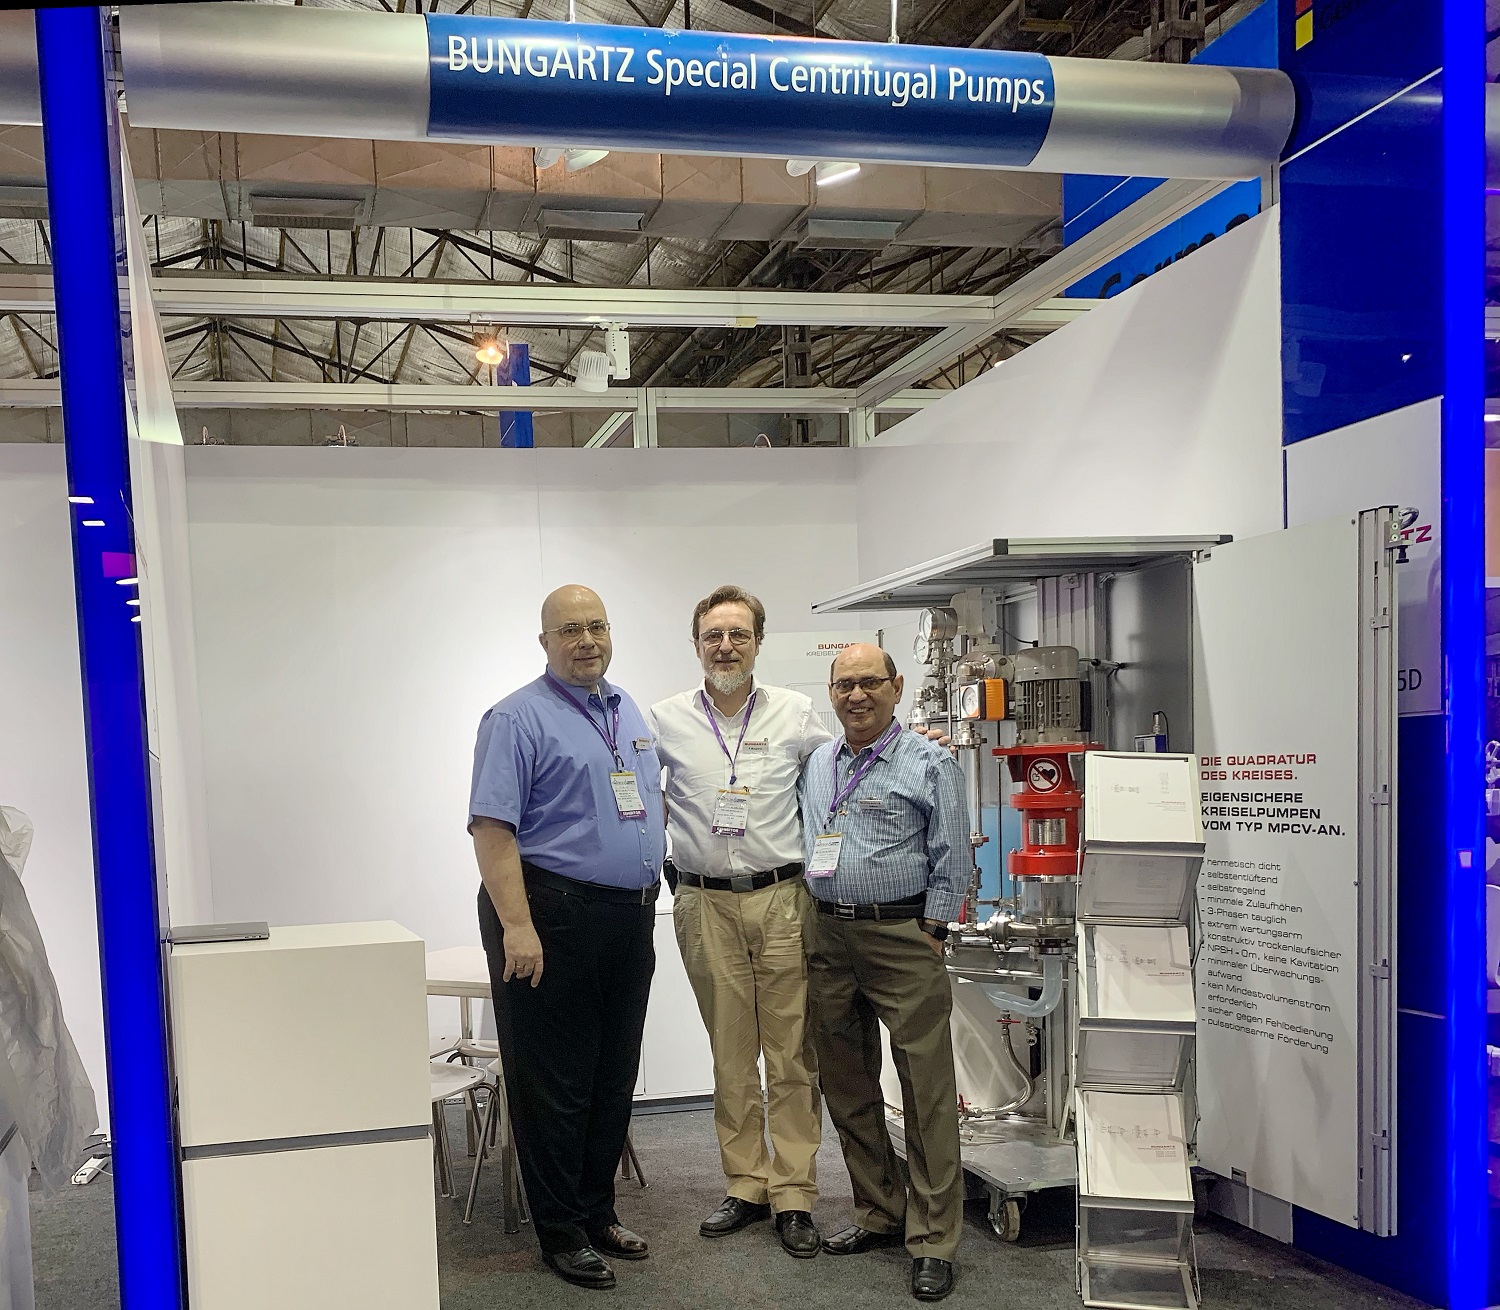 Left to right, Michael Wolf, regional director Asia-Pacific, Frank Bungartz, general manager and Anoop Misra, head of Bungartz Liaison, Mumbai.